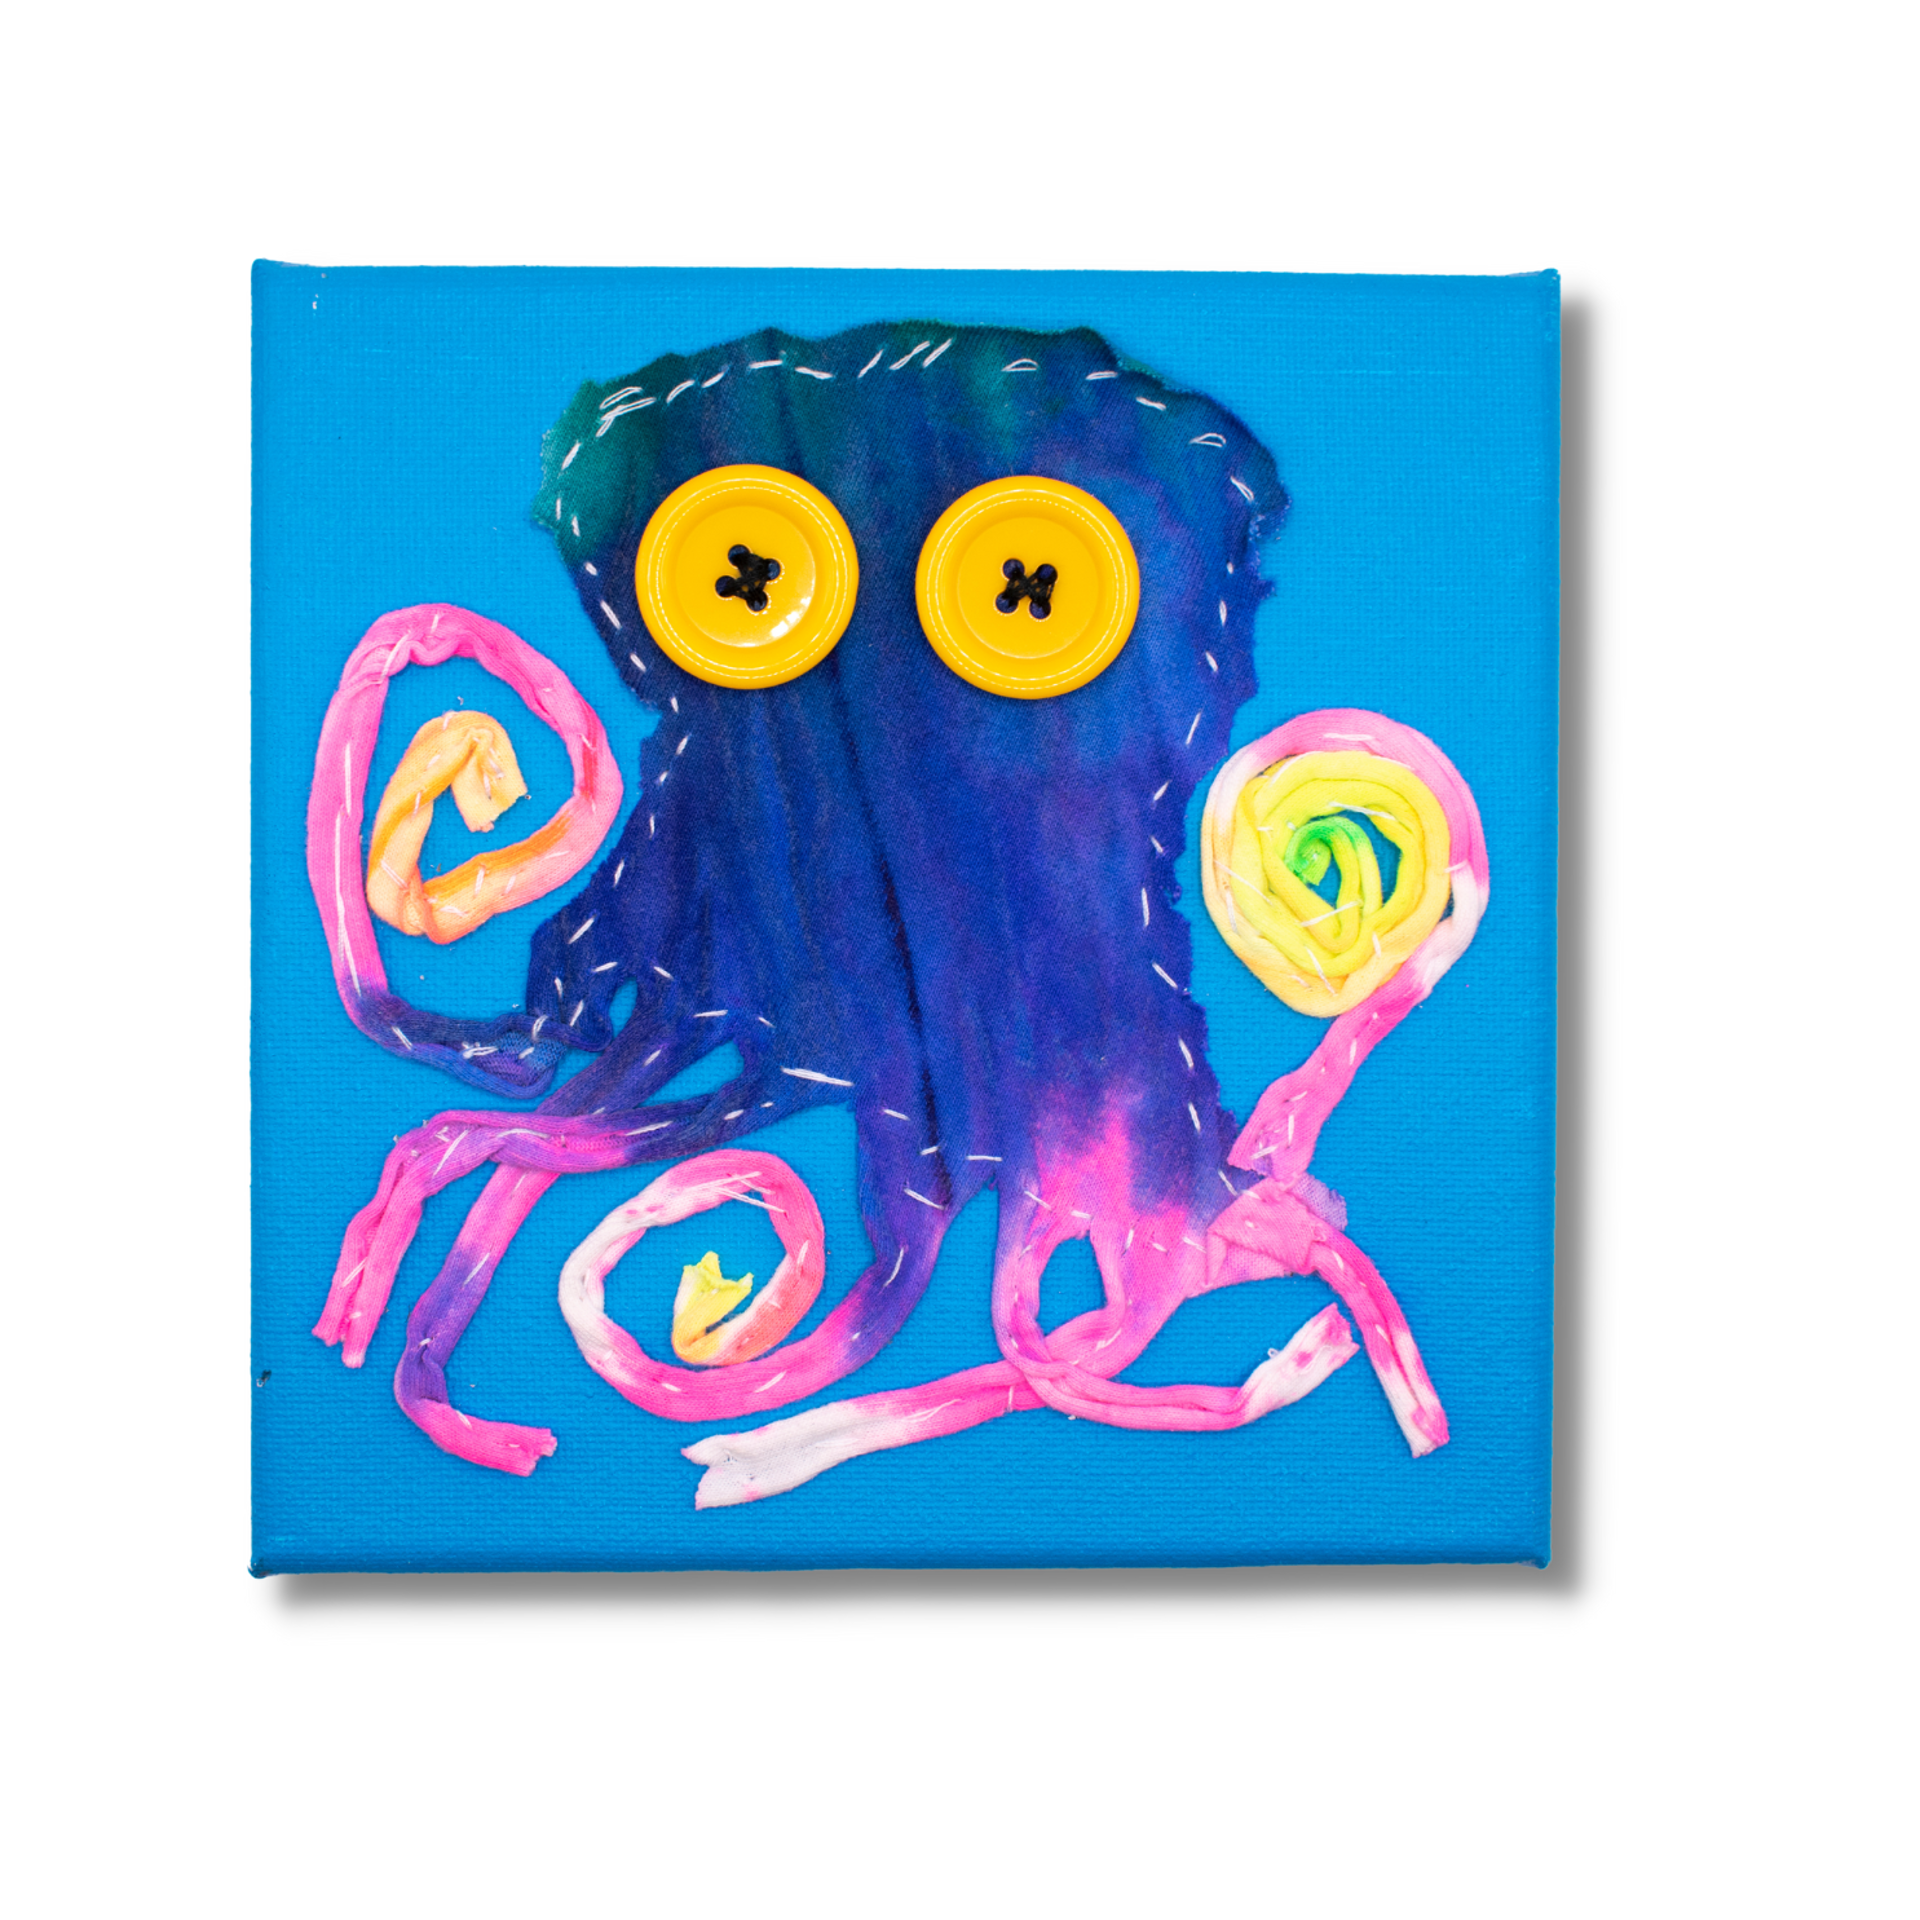 Baby Octopus (Blue) by Susan Spangenberg